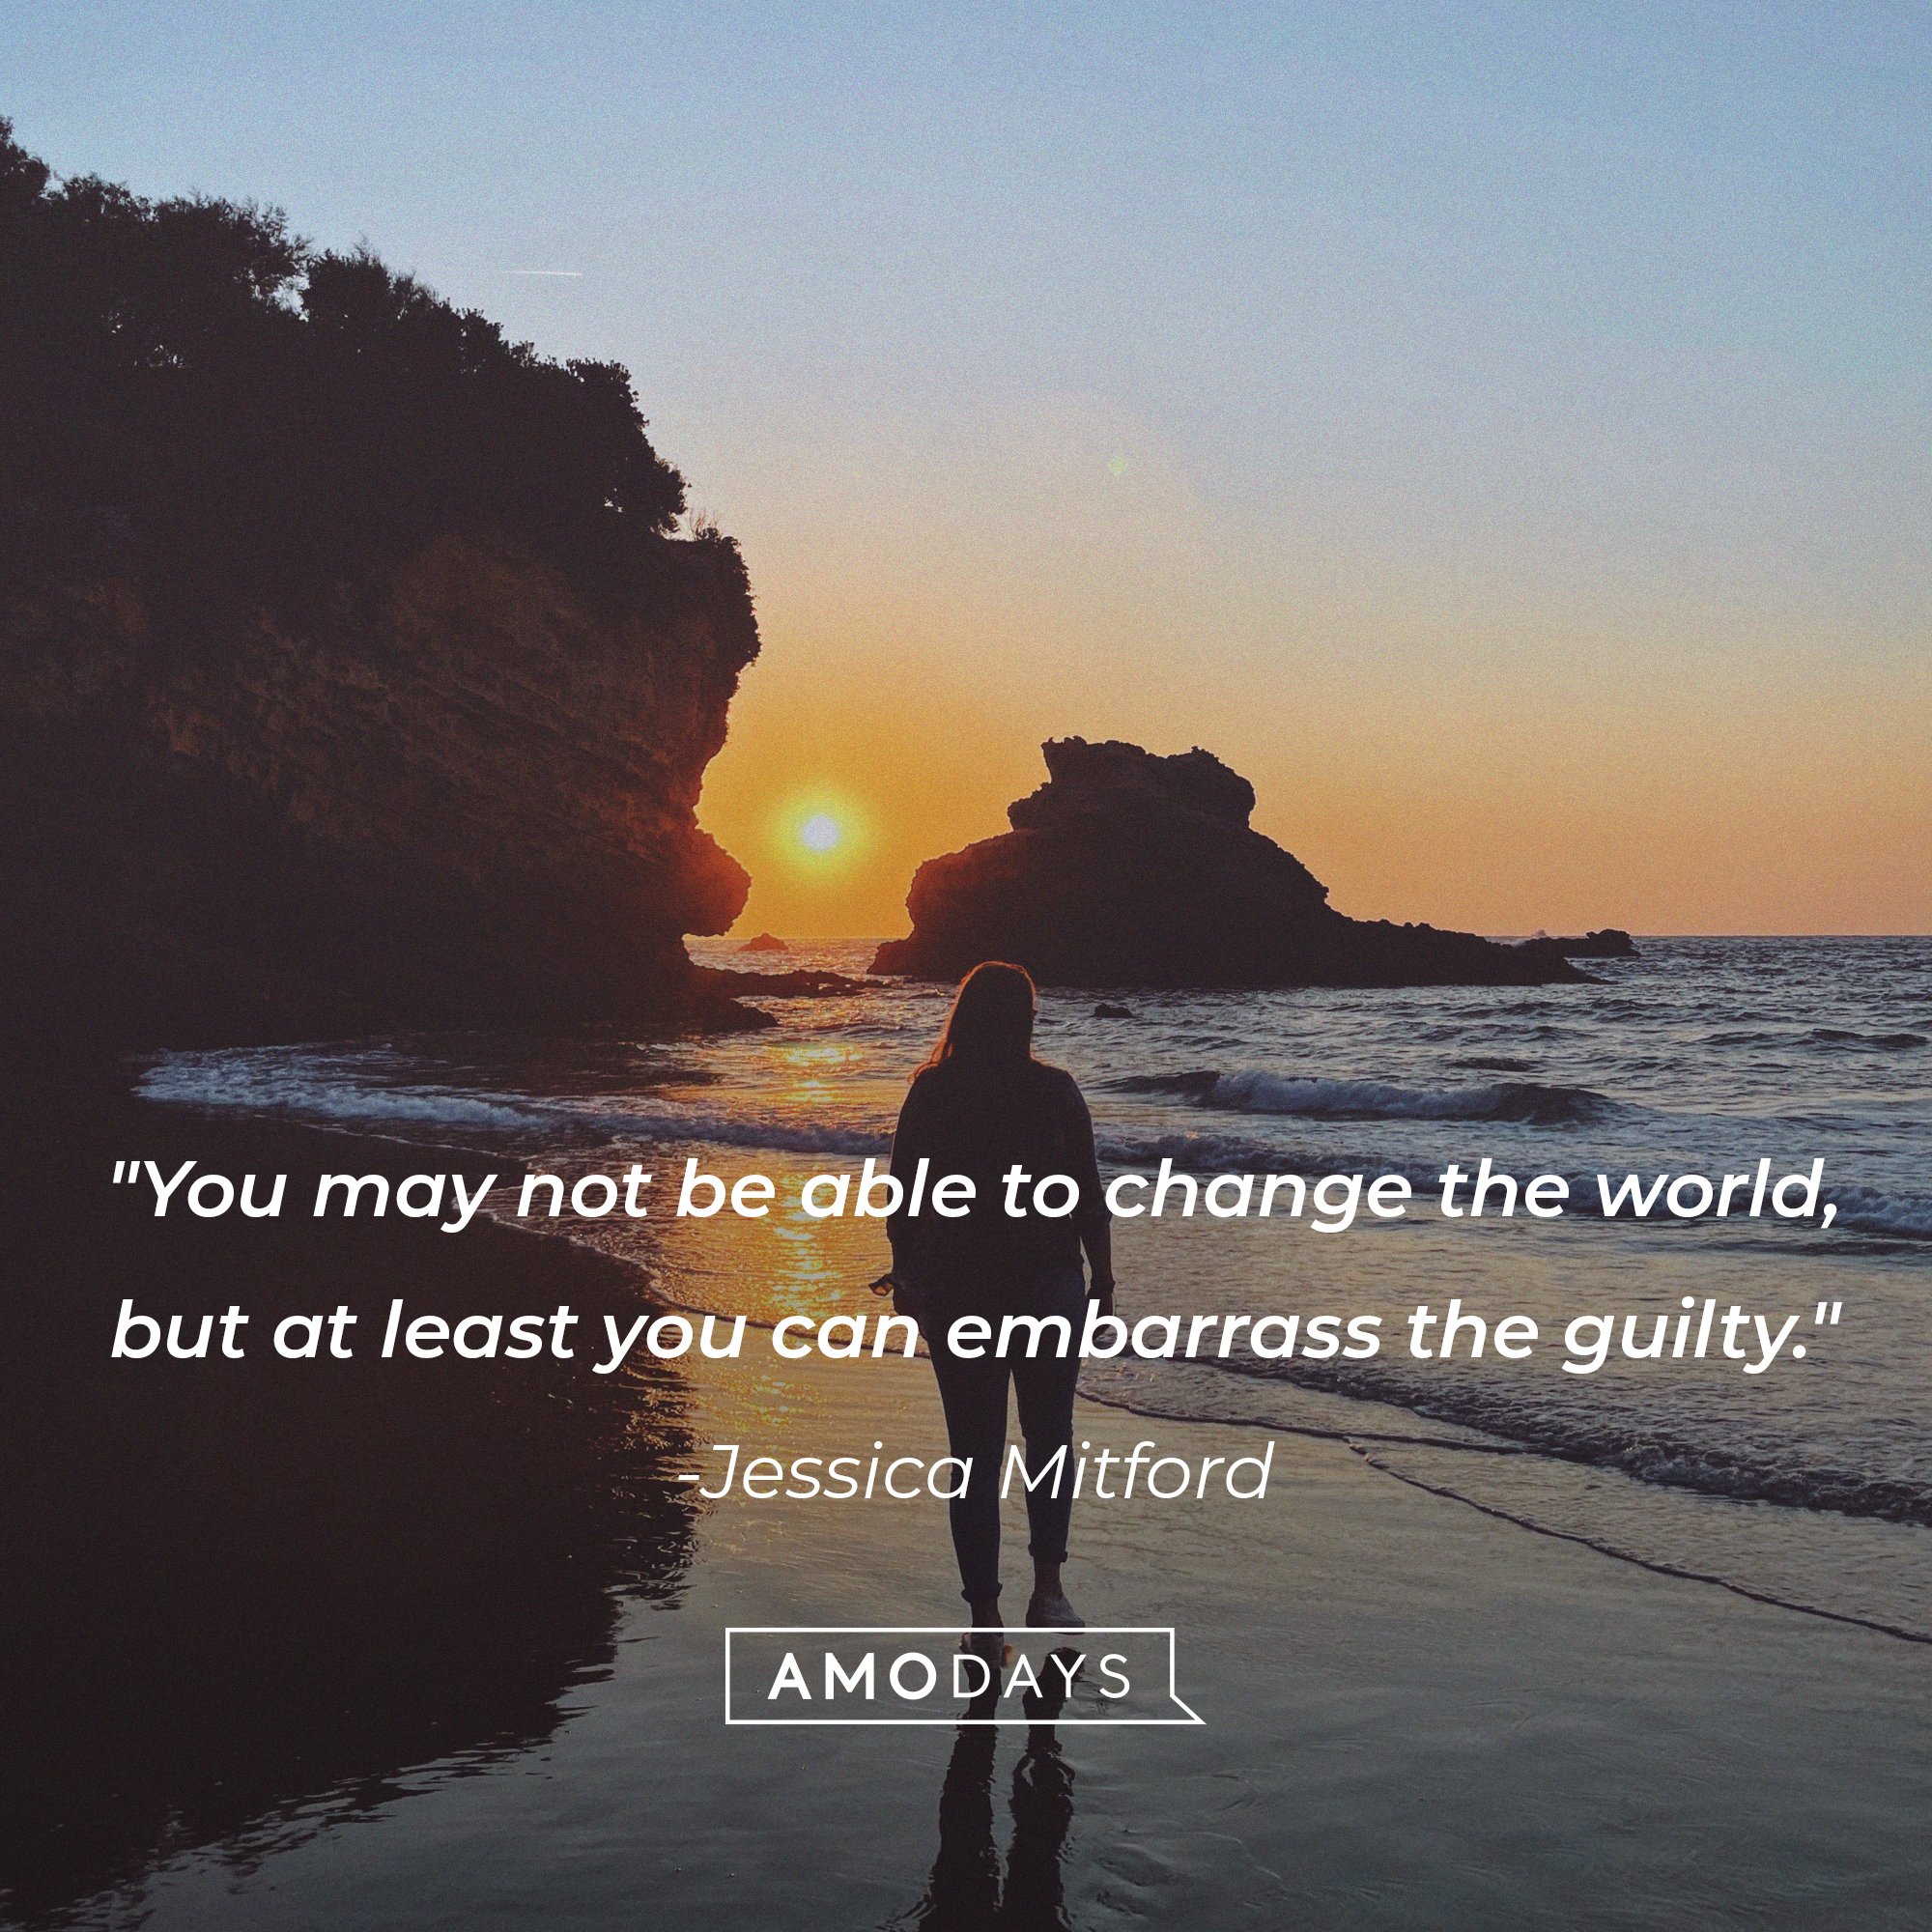 Jessica Mitford's quote: "You may not be able to change the world, but at least you can embarrass the guilty." | Image: AmoDays